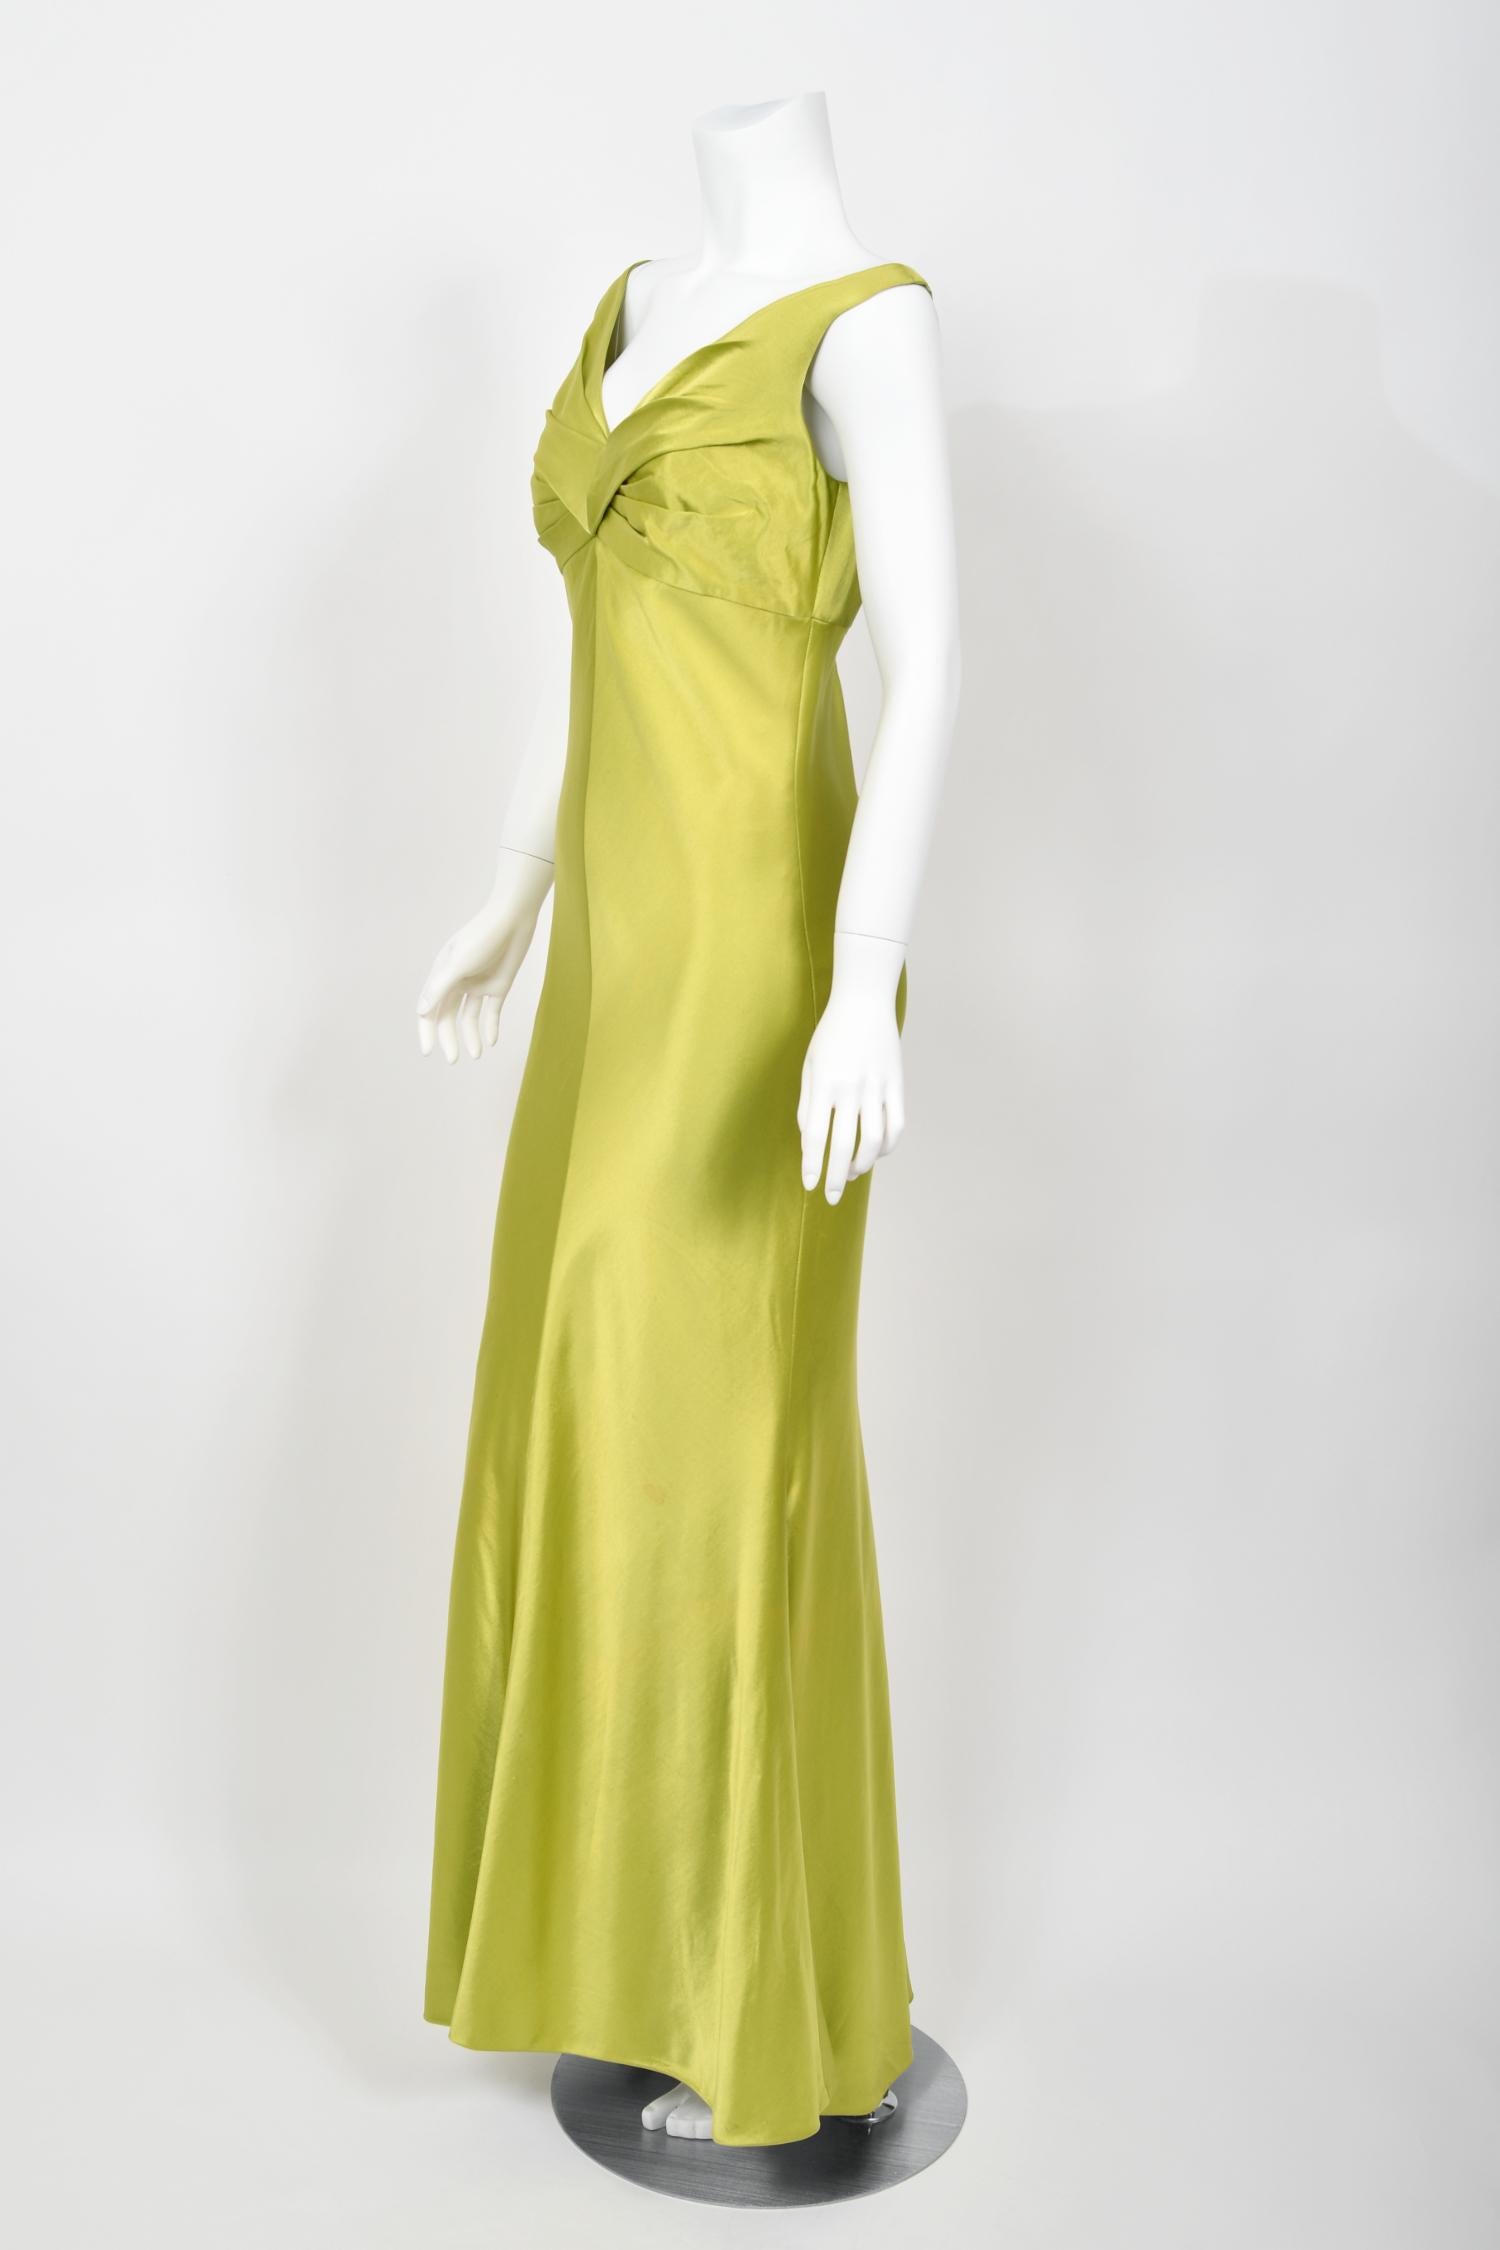 1995 Gianni Versace Couture Documented Runway Chartreuse Silk Off-Shoulder Gown For Sale 9